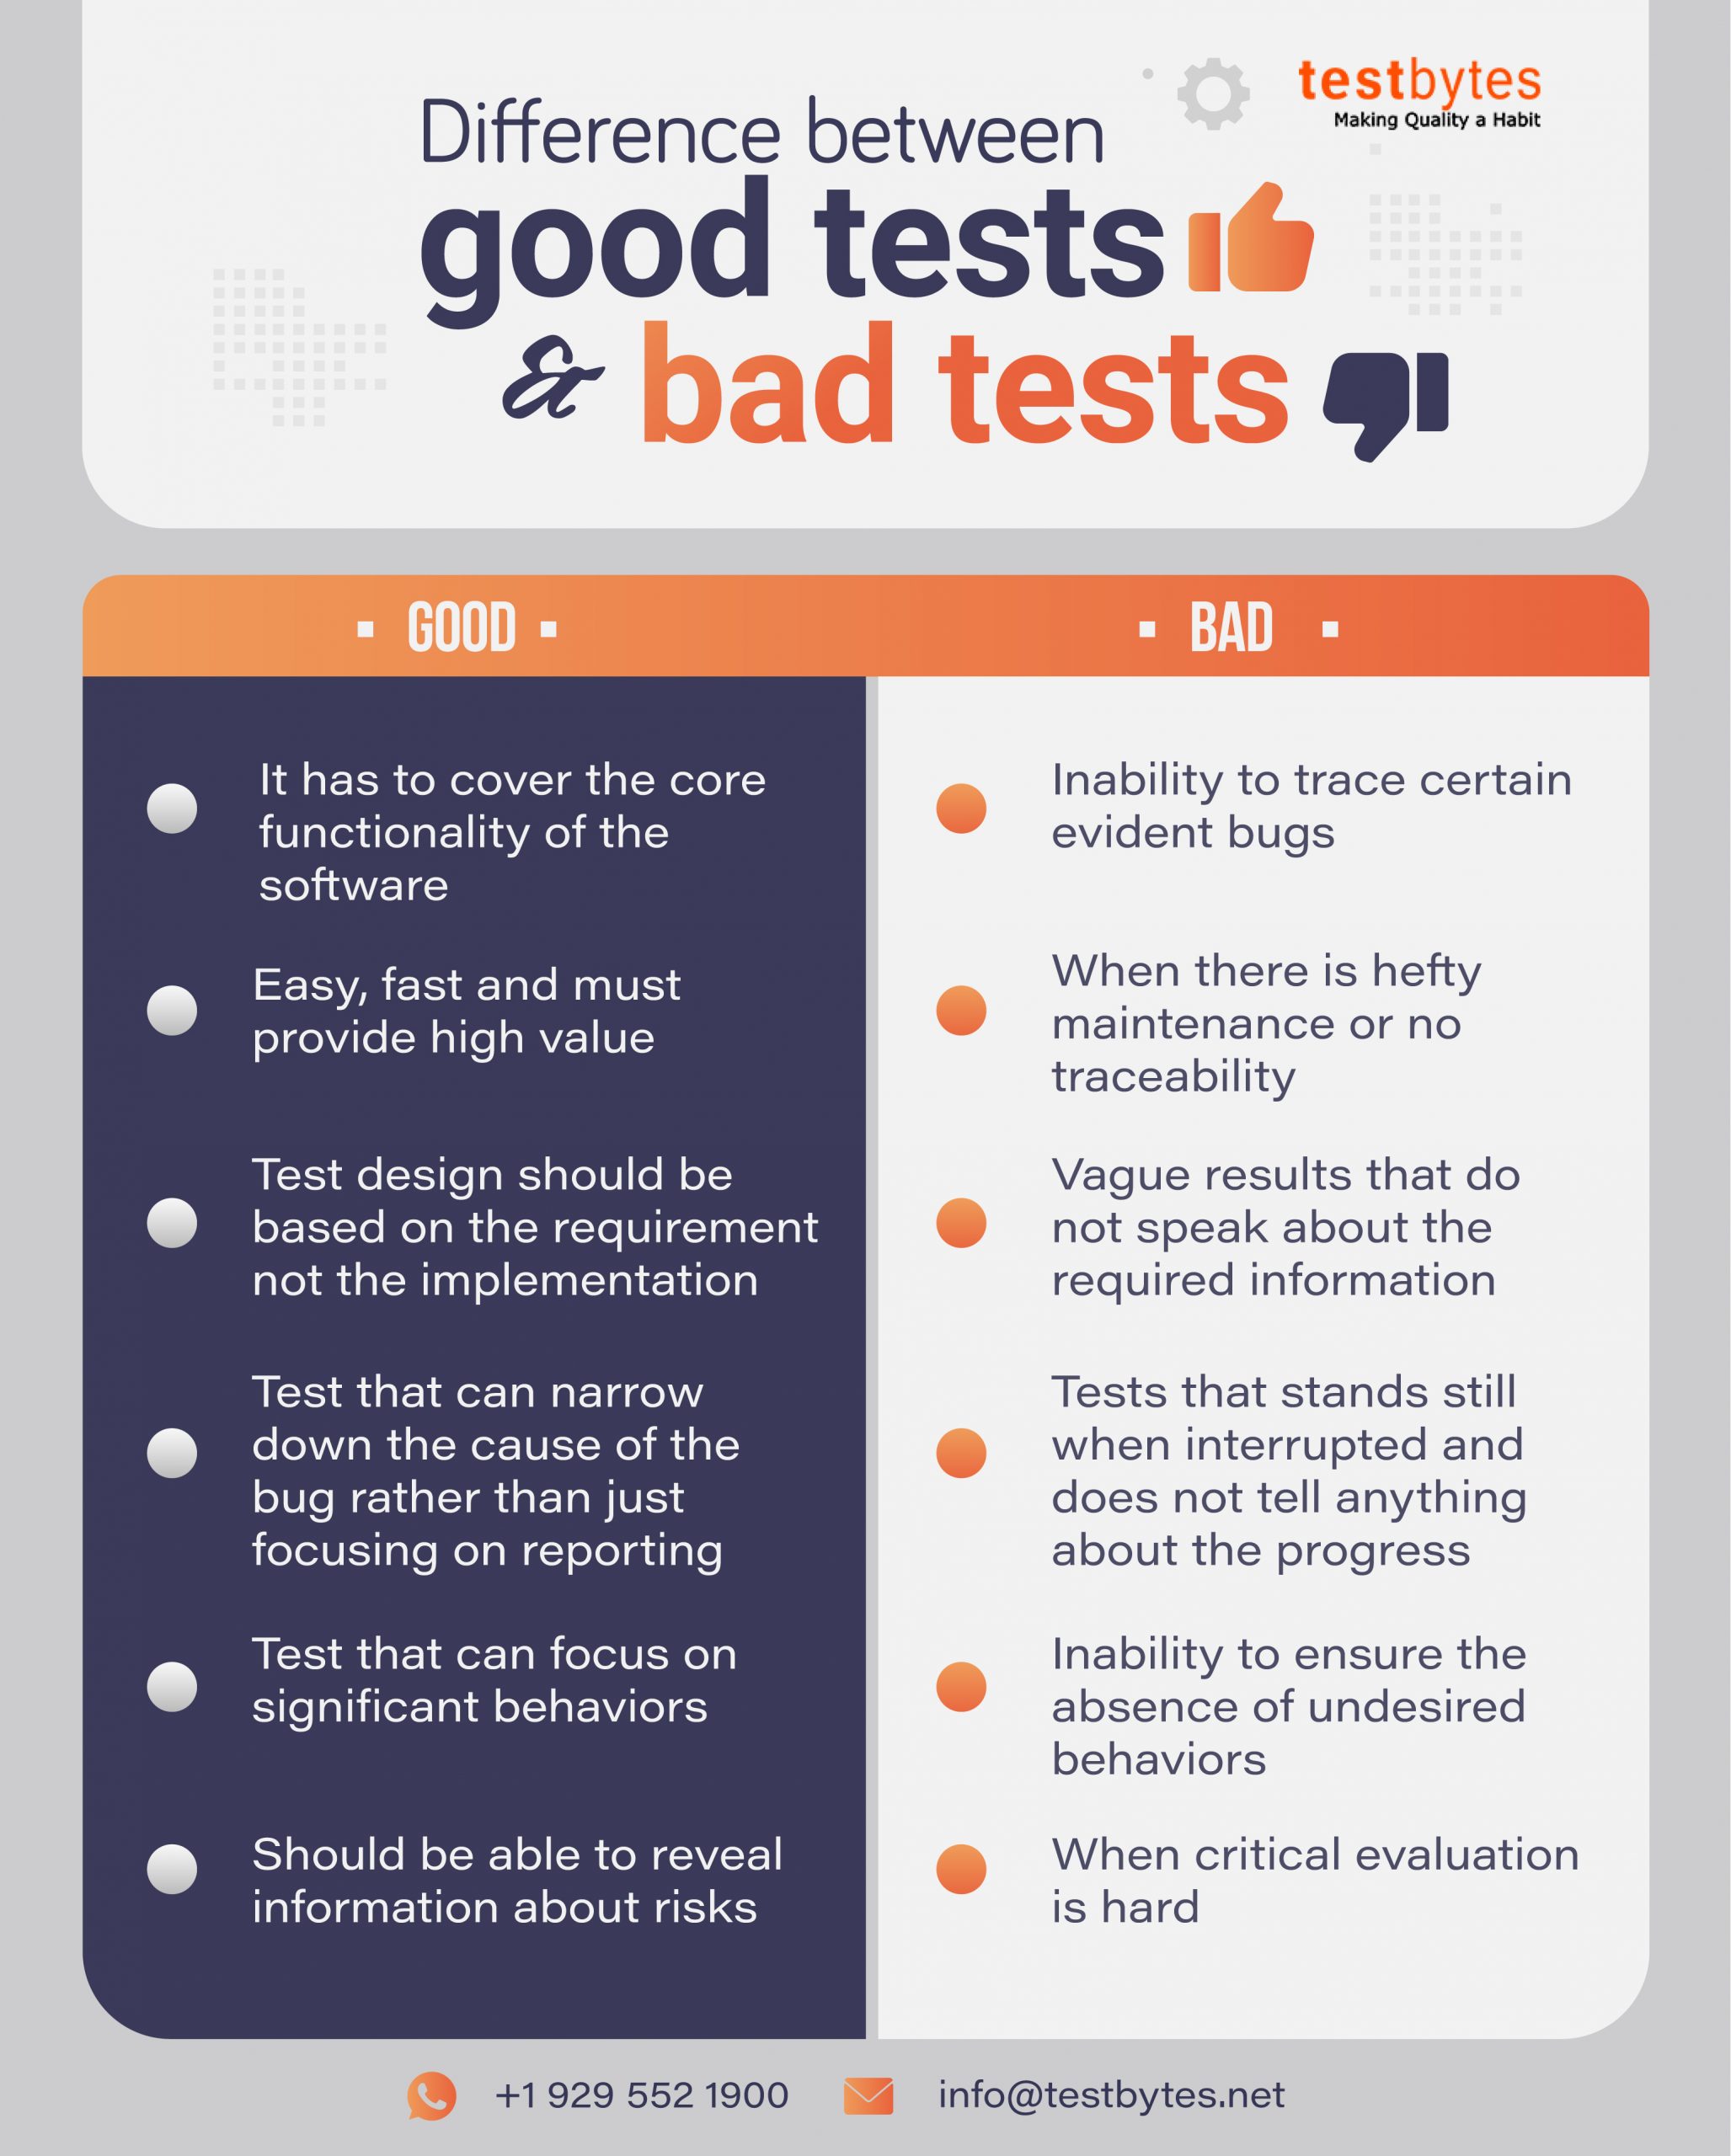 Difference between a good test and a bad test